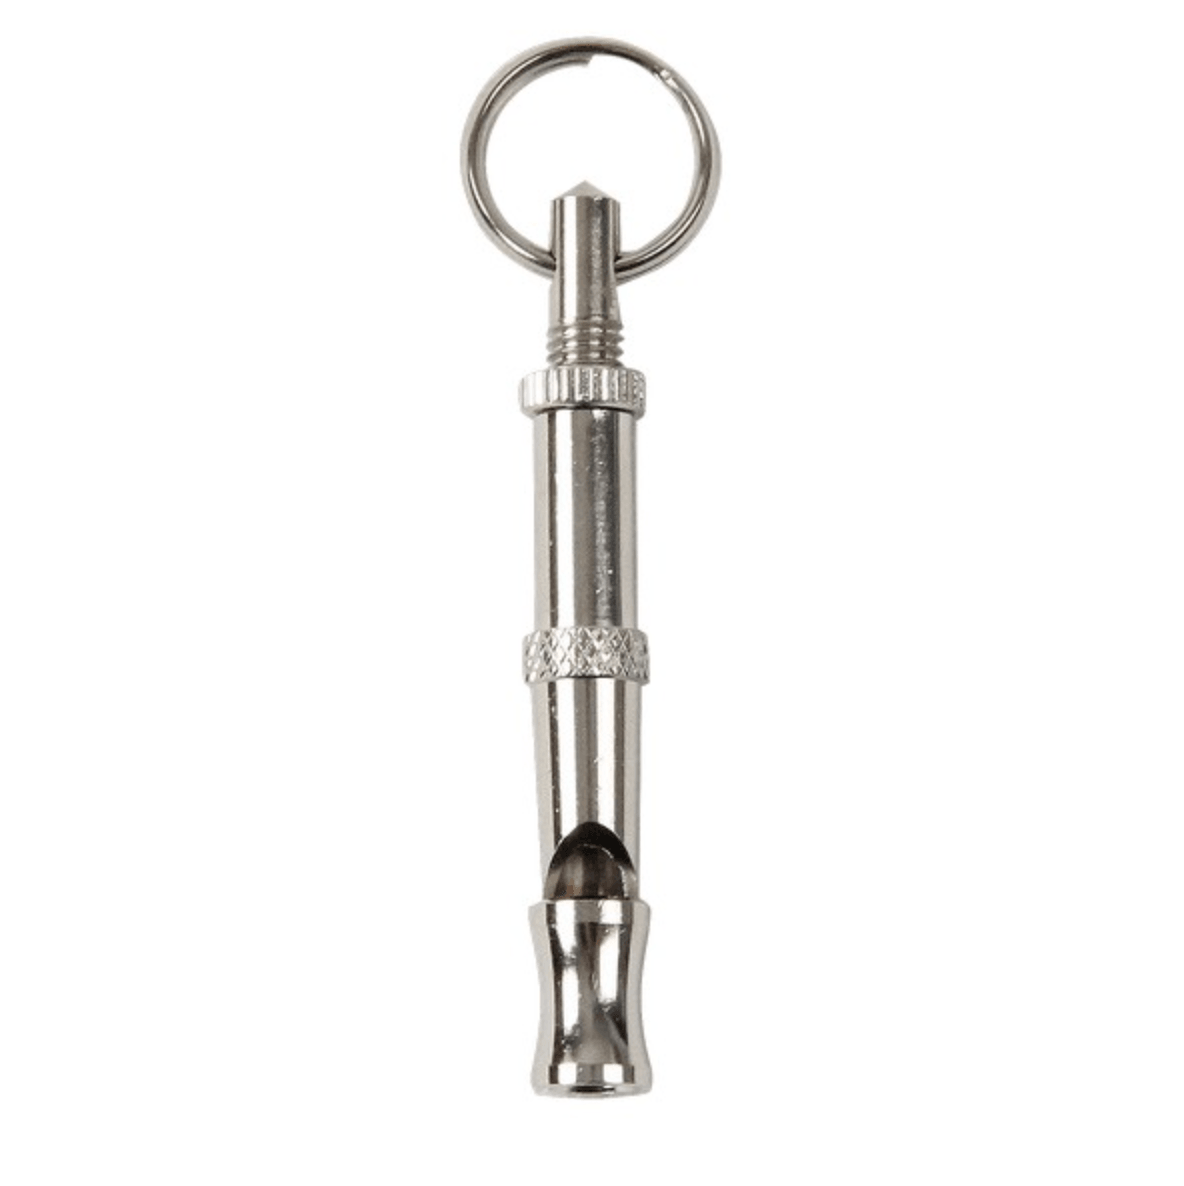 Pawise Dog Training Whistle Black - Pet's Play Toy Store